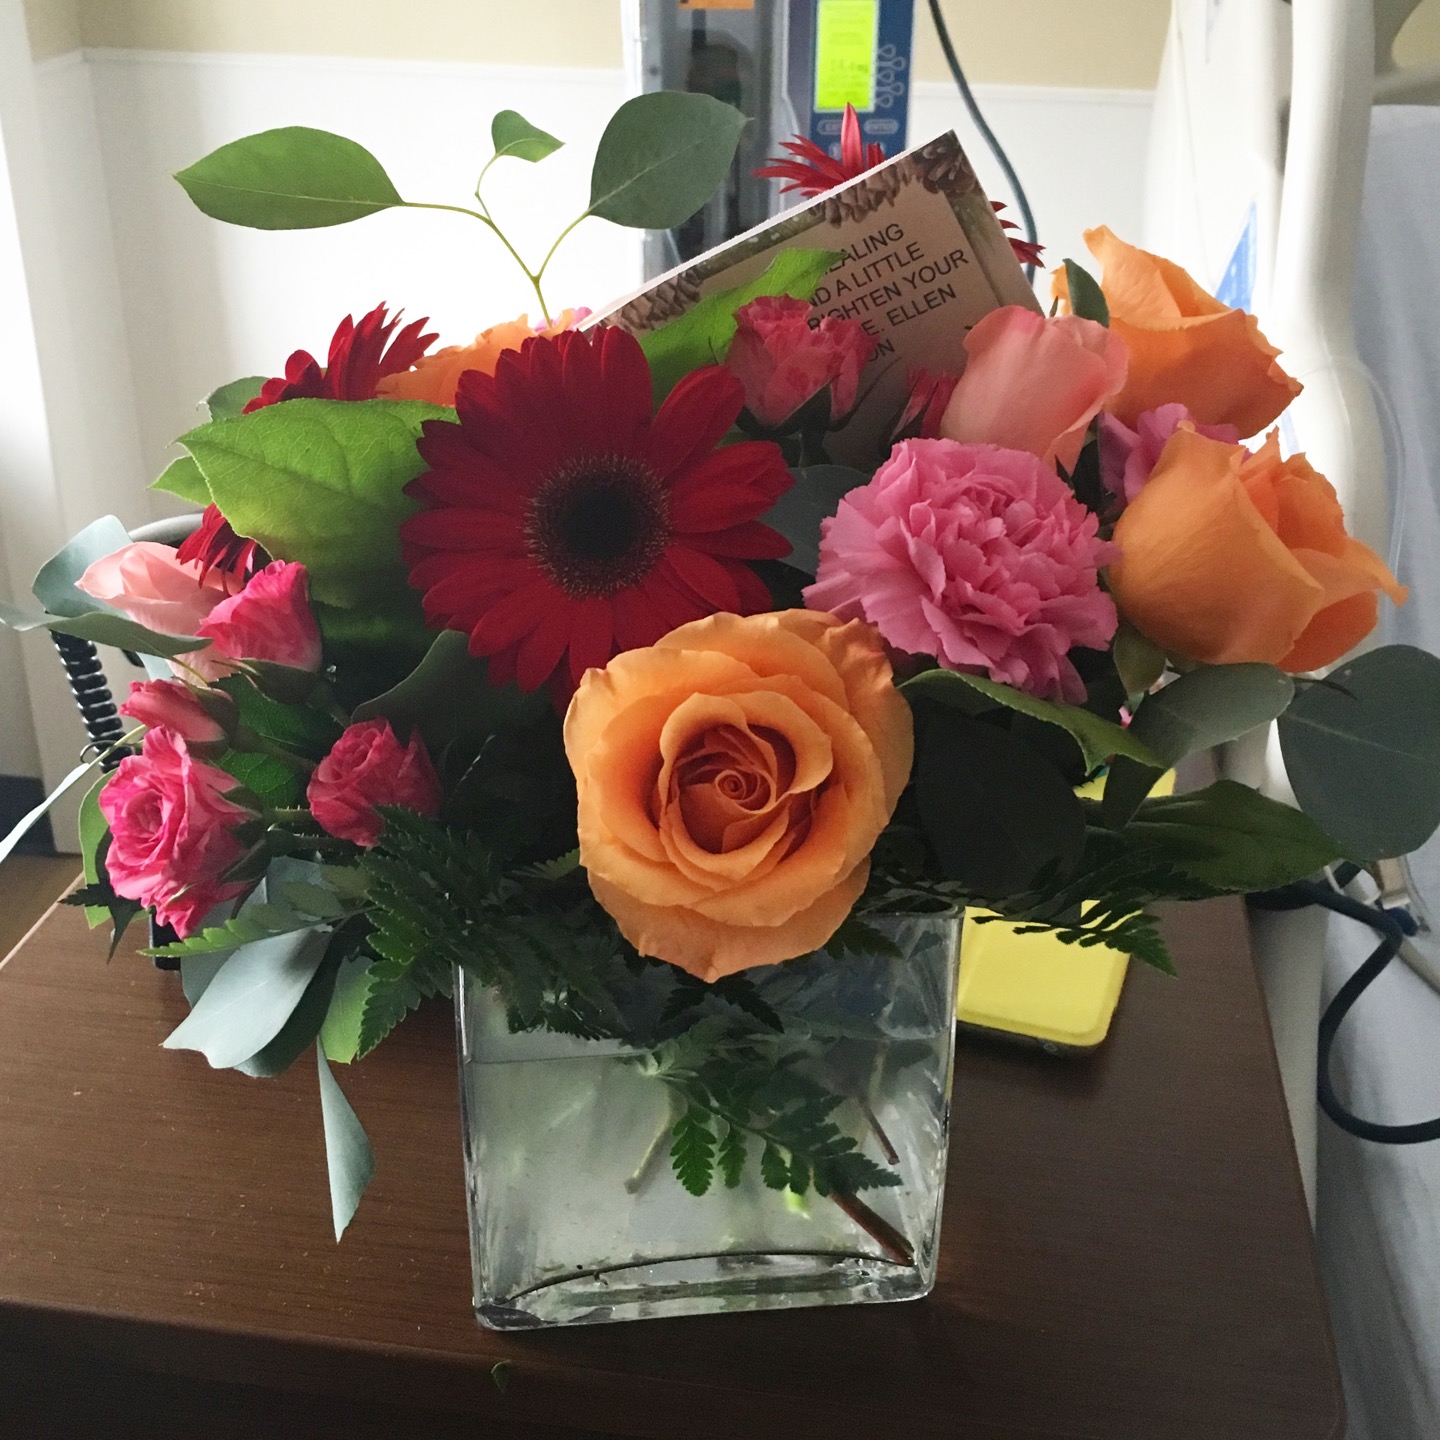 Thank you for the flowers, Ellen!